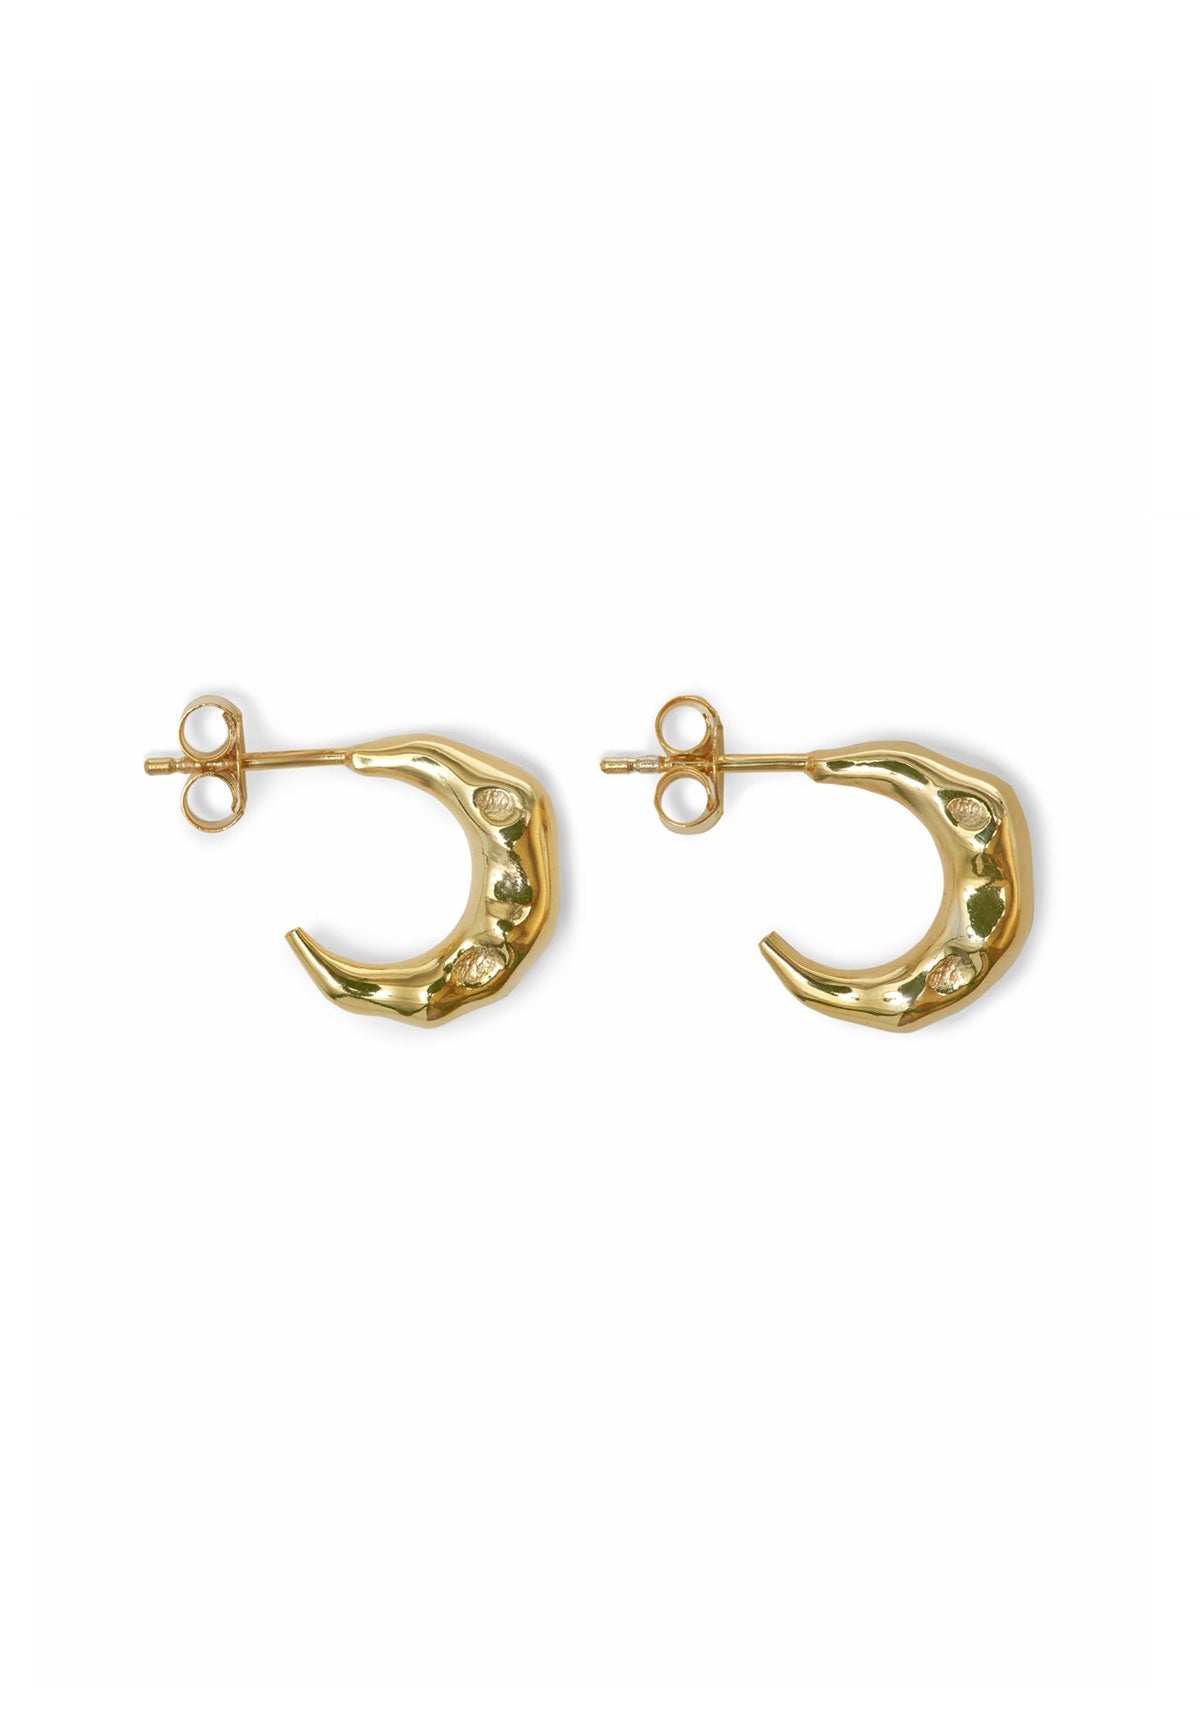 ORGANIC HOOPS GOLD SMALL